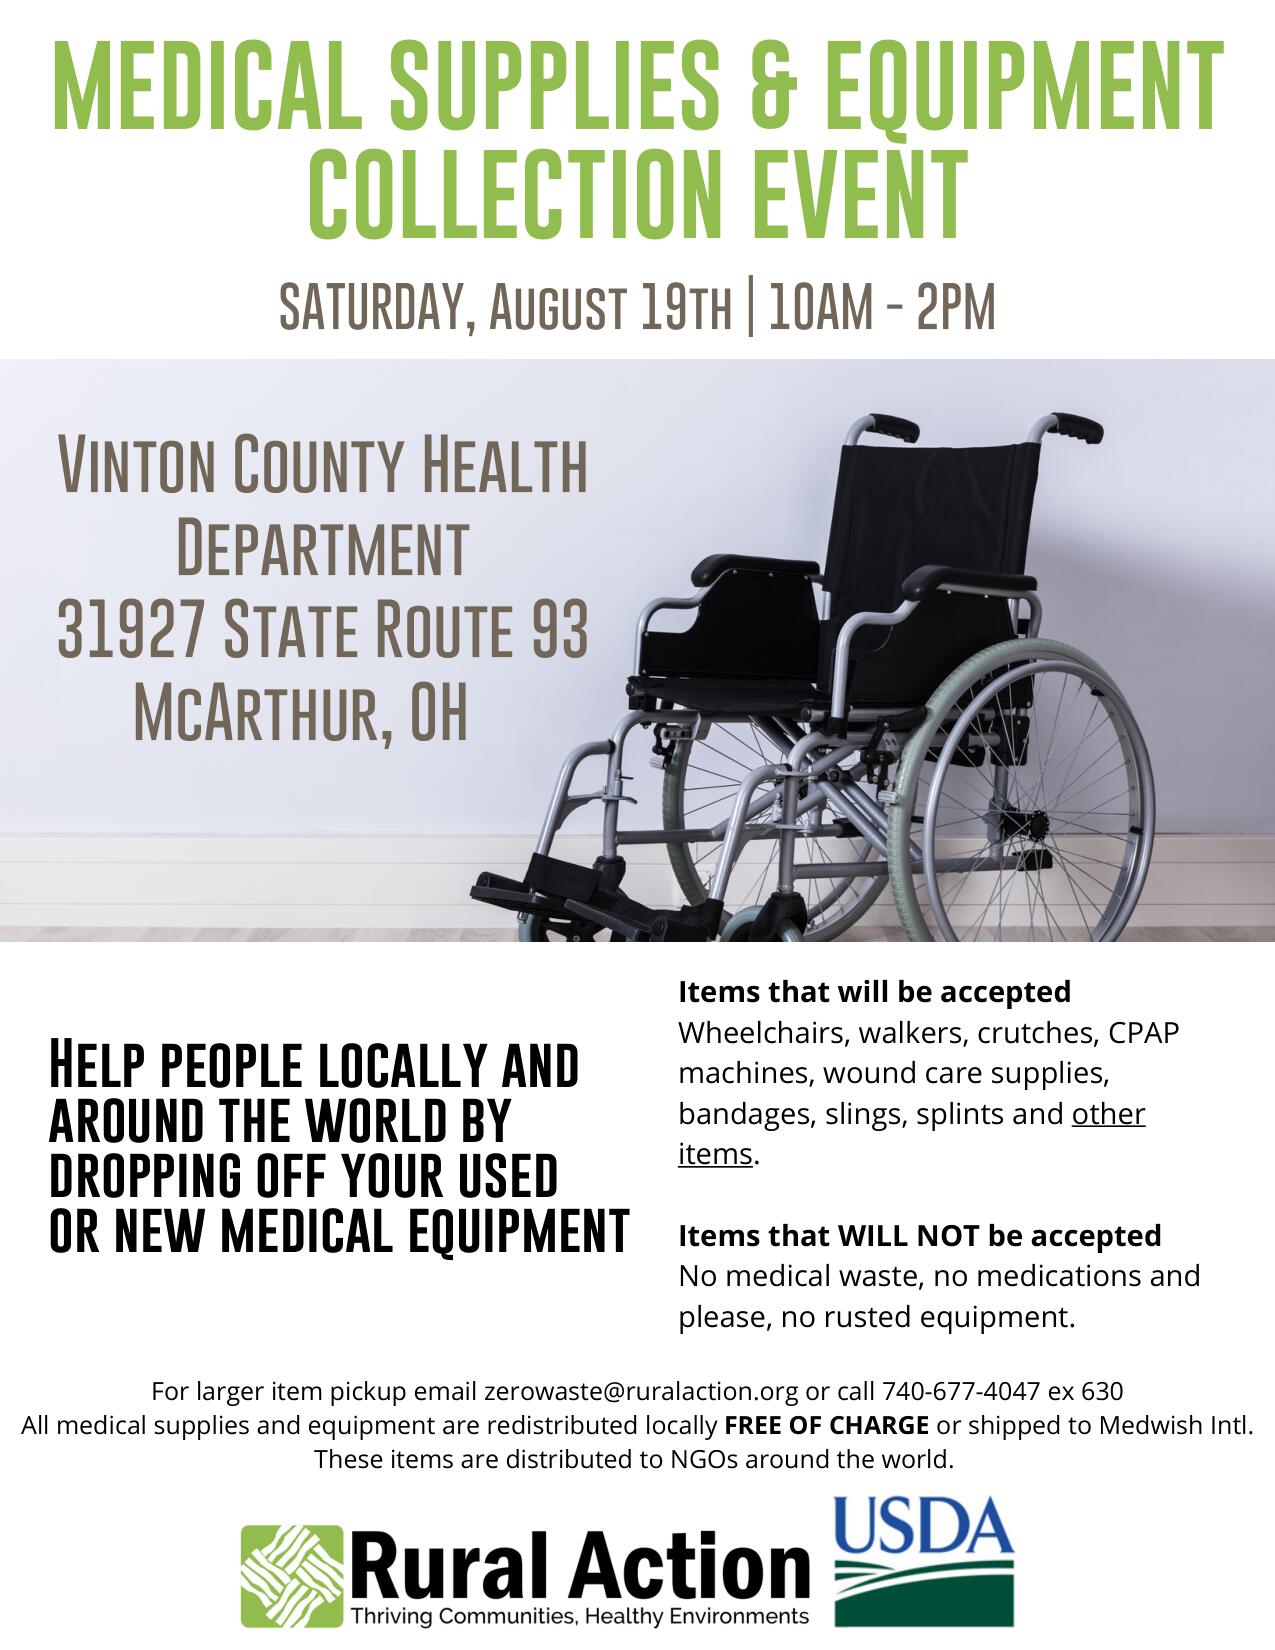 A flyer for Rural Action's Medical Supplies and Equipment Collection Event, featuring an image of a wheelchair.